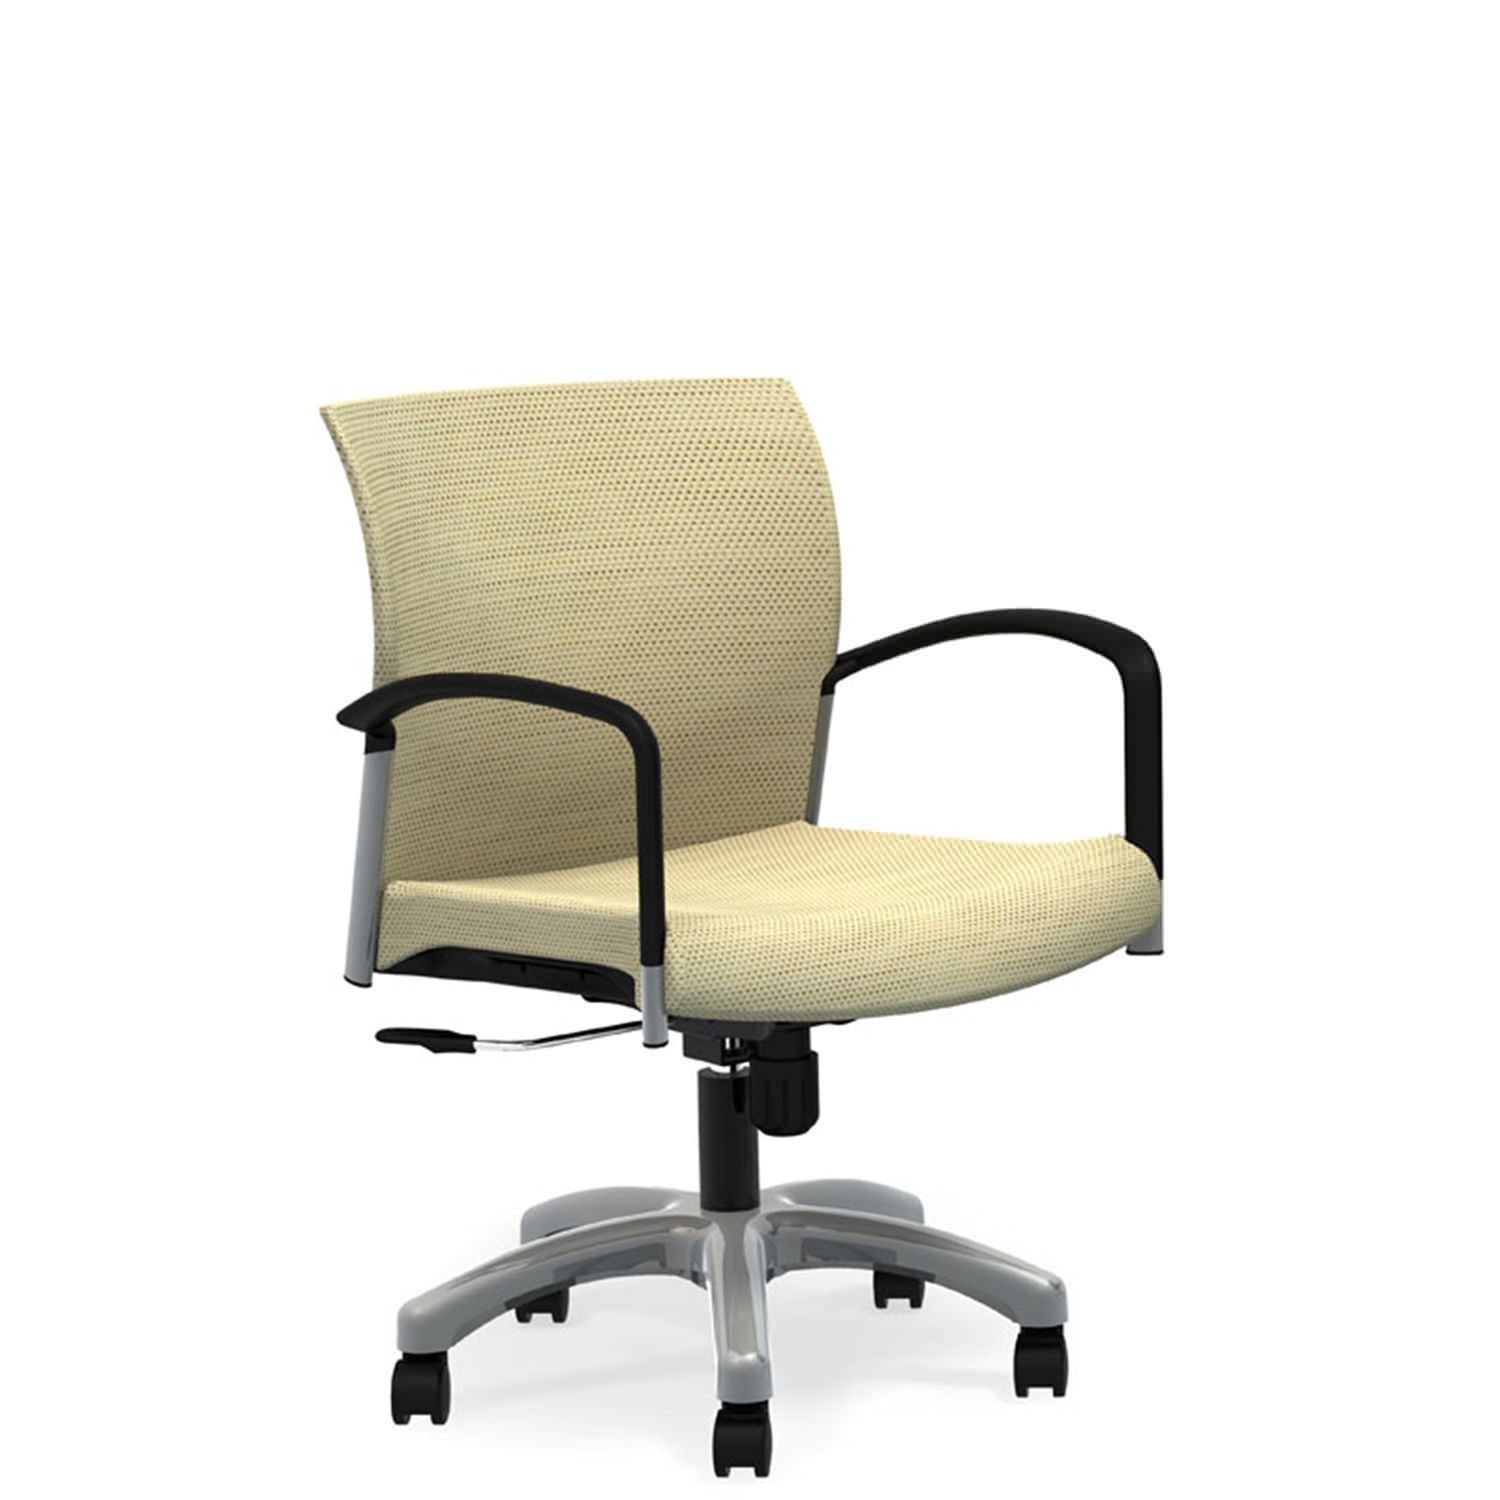 Office chair / with armrests / on casters / pneumatic Conceive CO15A, Conceive CO16A La-Z-Boy Contract Furniture